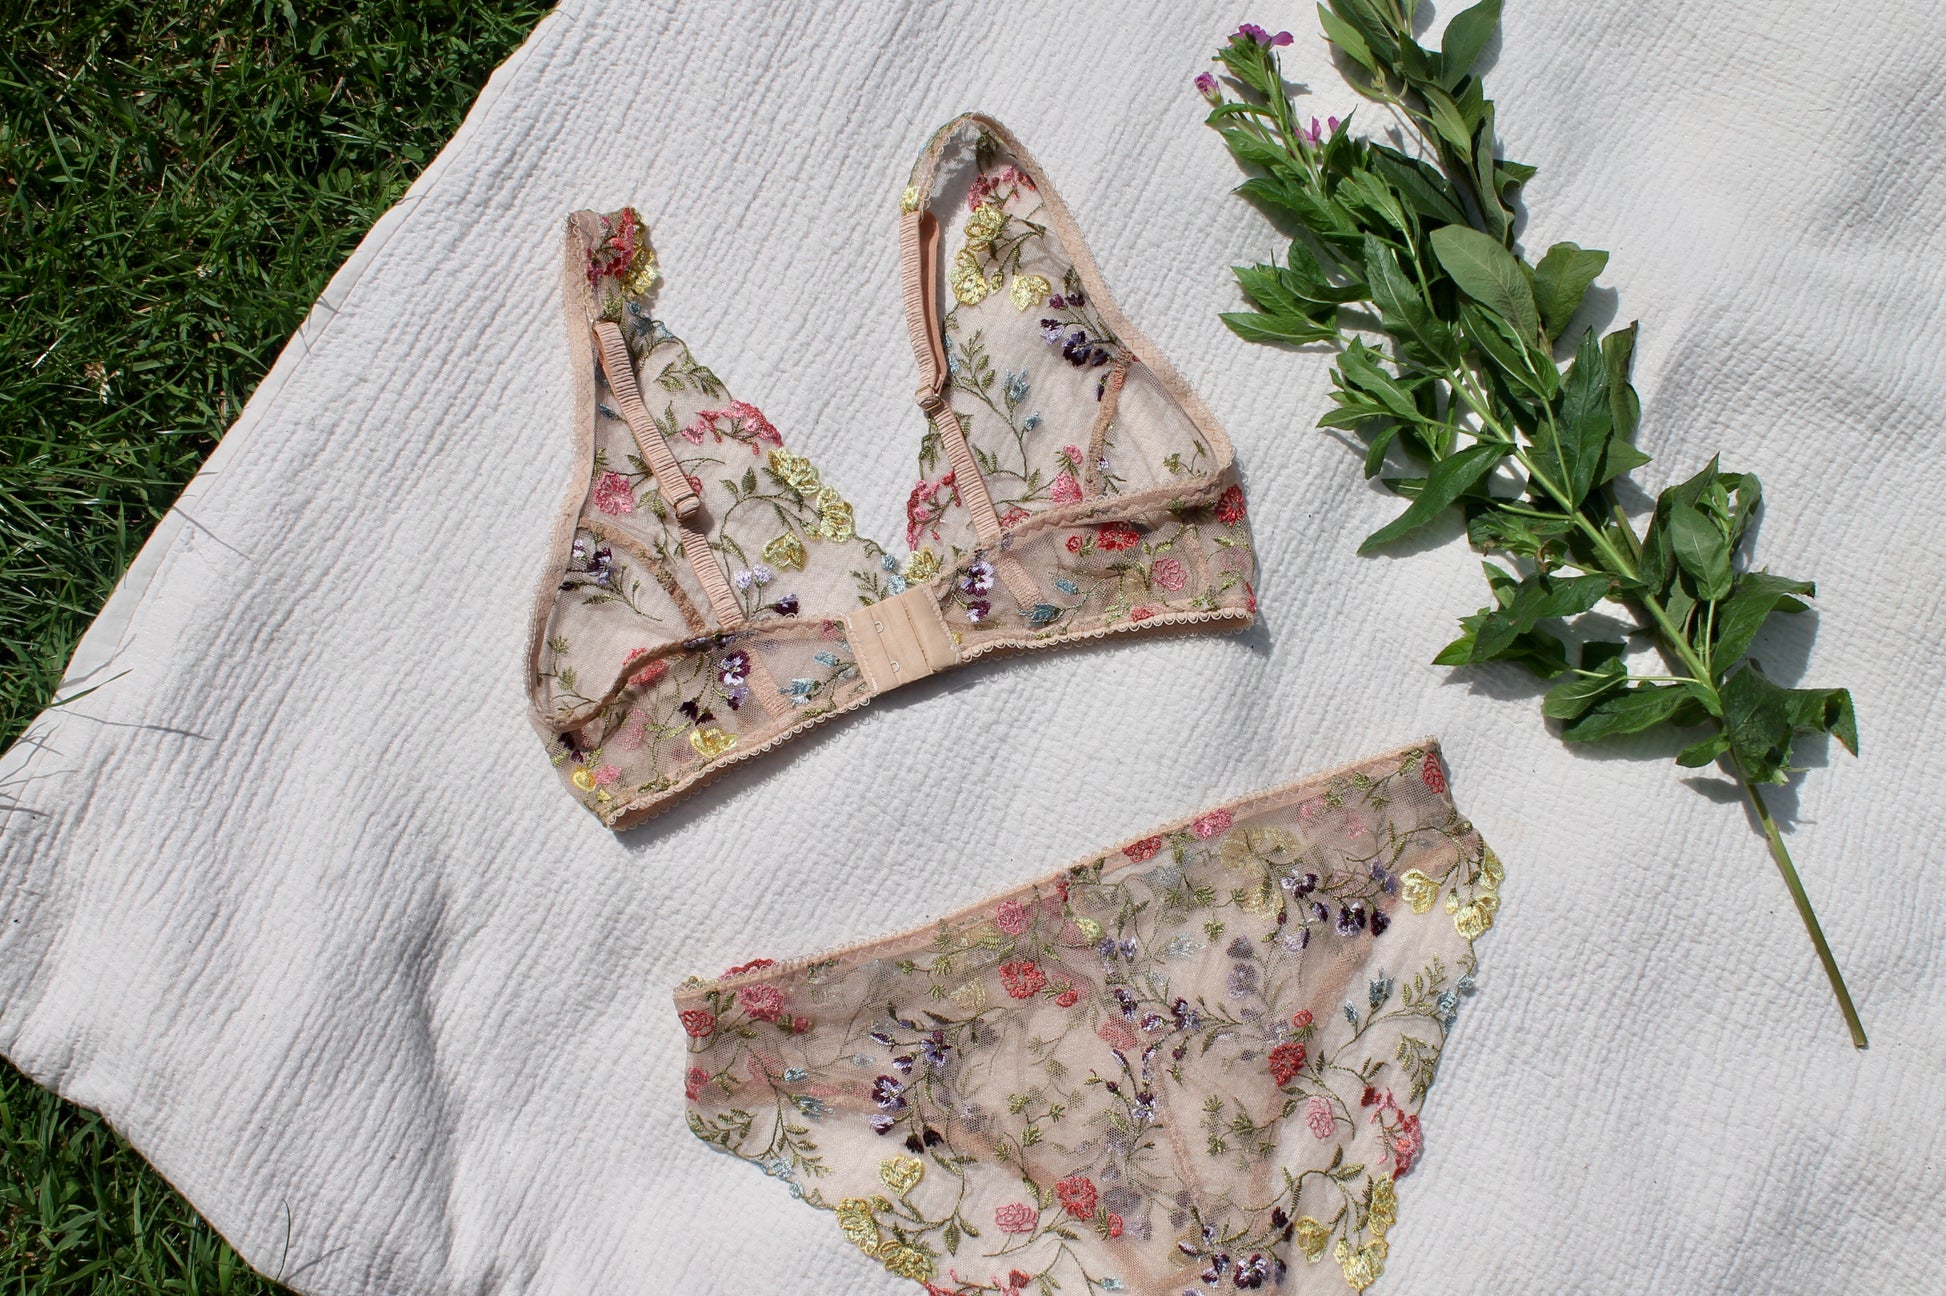 Back view of embroidered floral lace bralette and knicker set